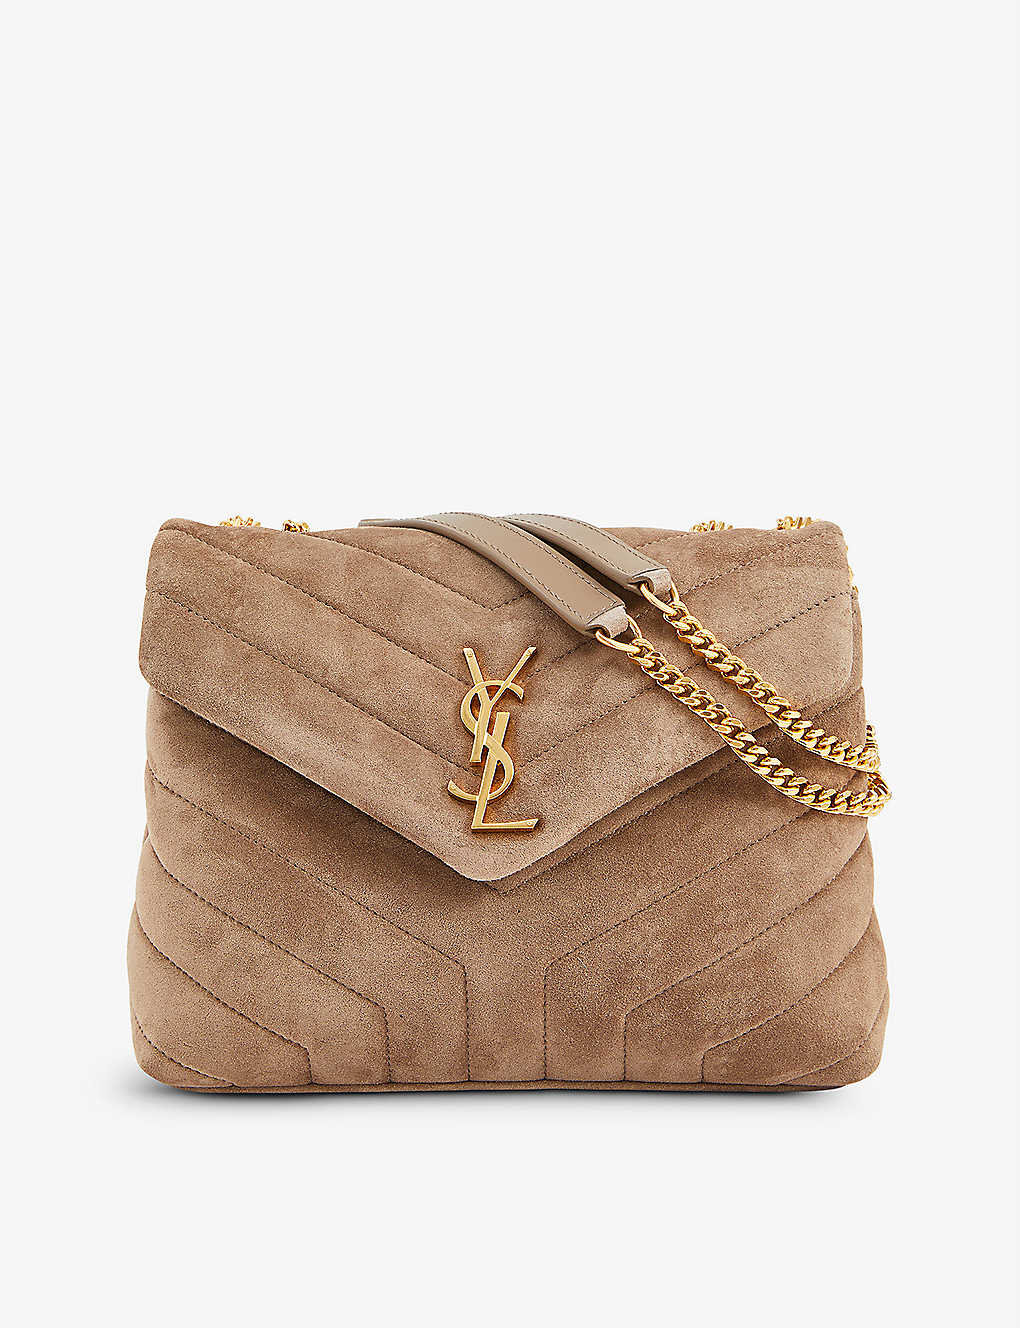 Saint Laurent Womens Taupe Loulou Puffer Small Suede Shoulder Bag